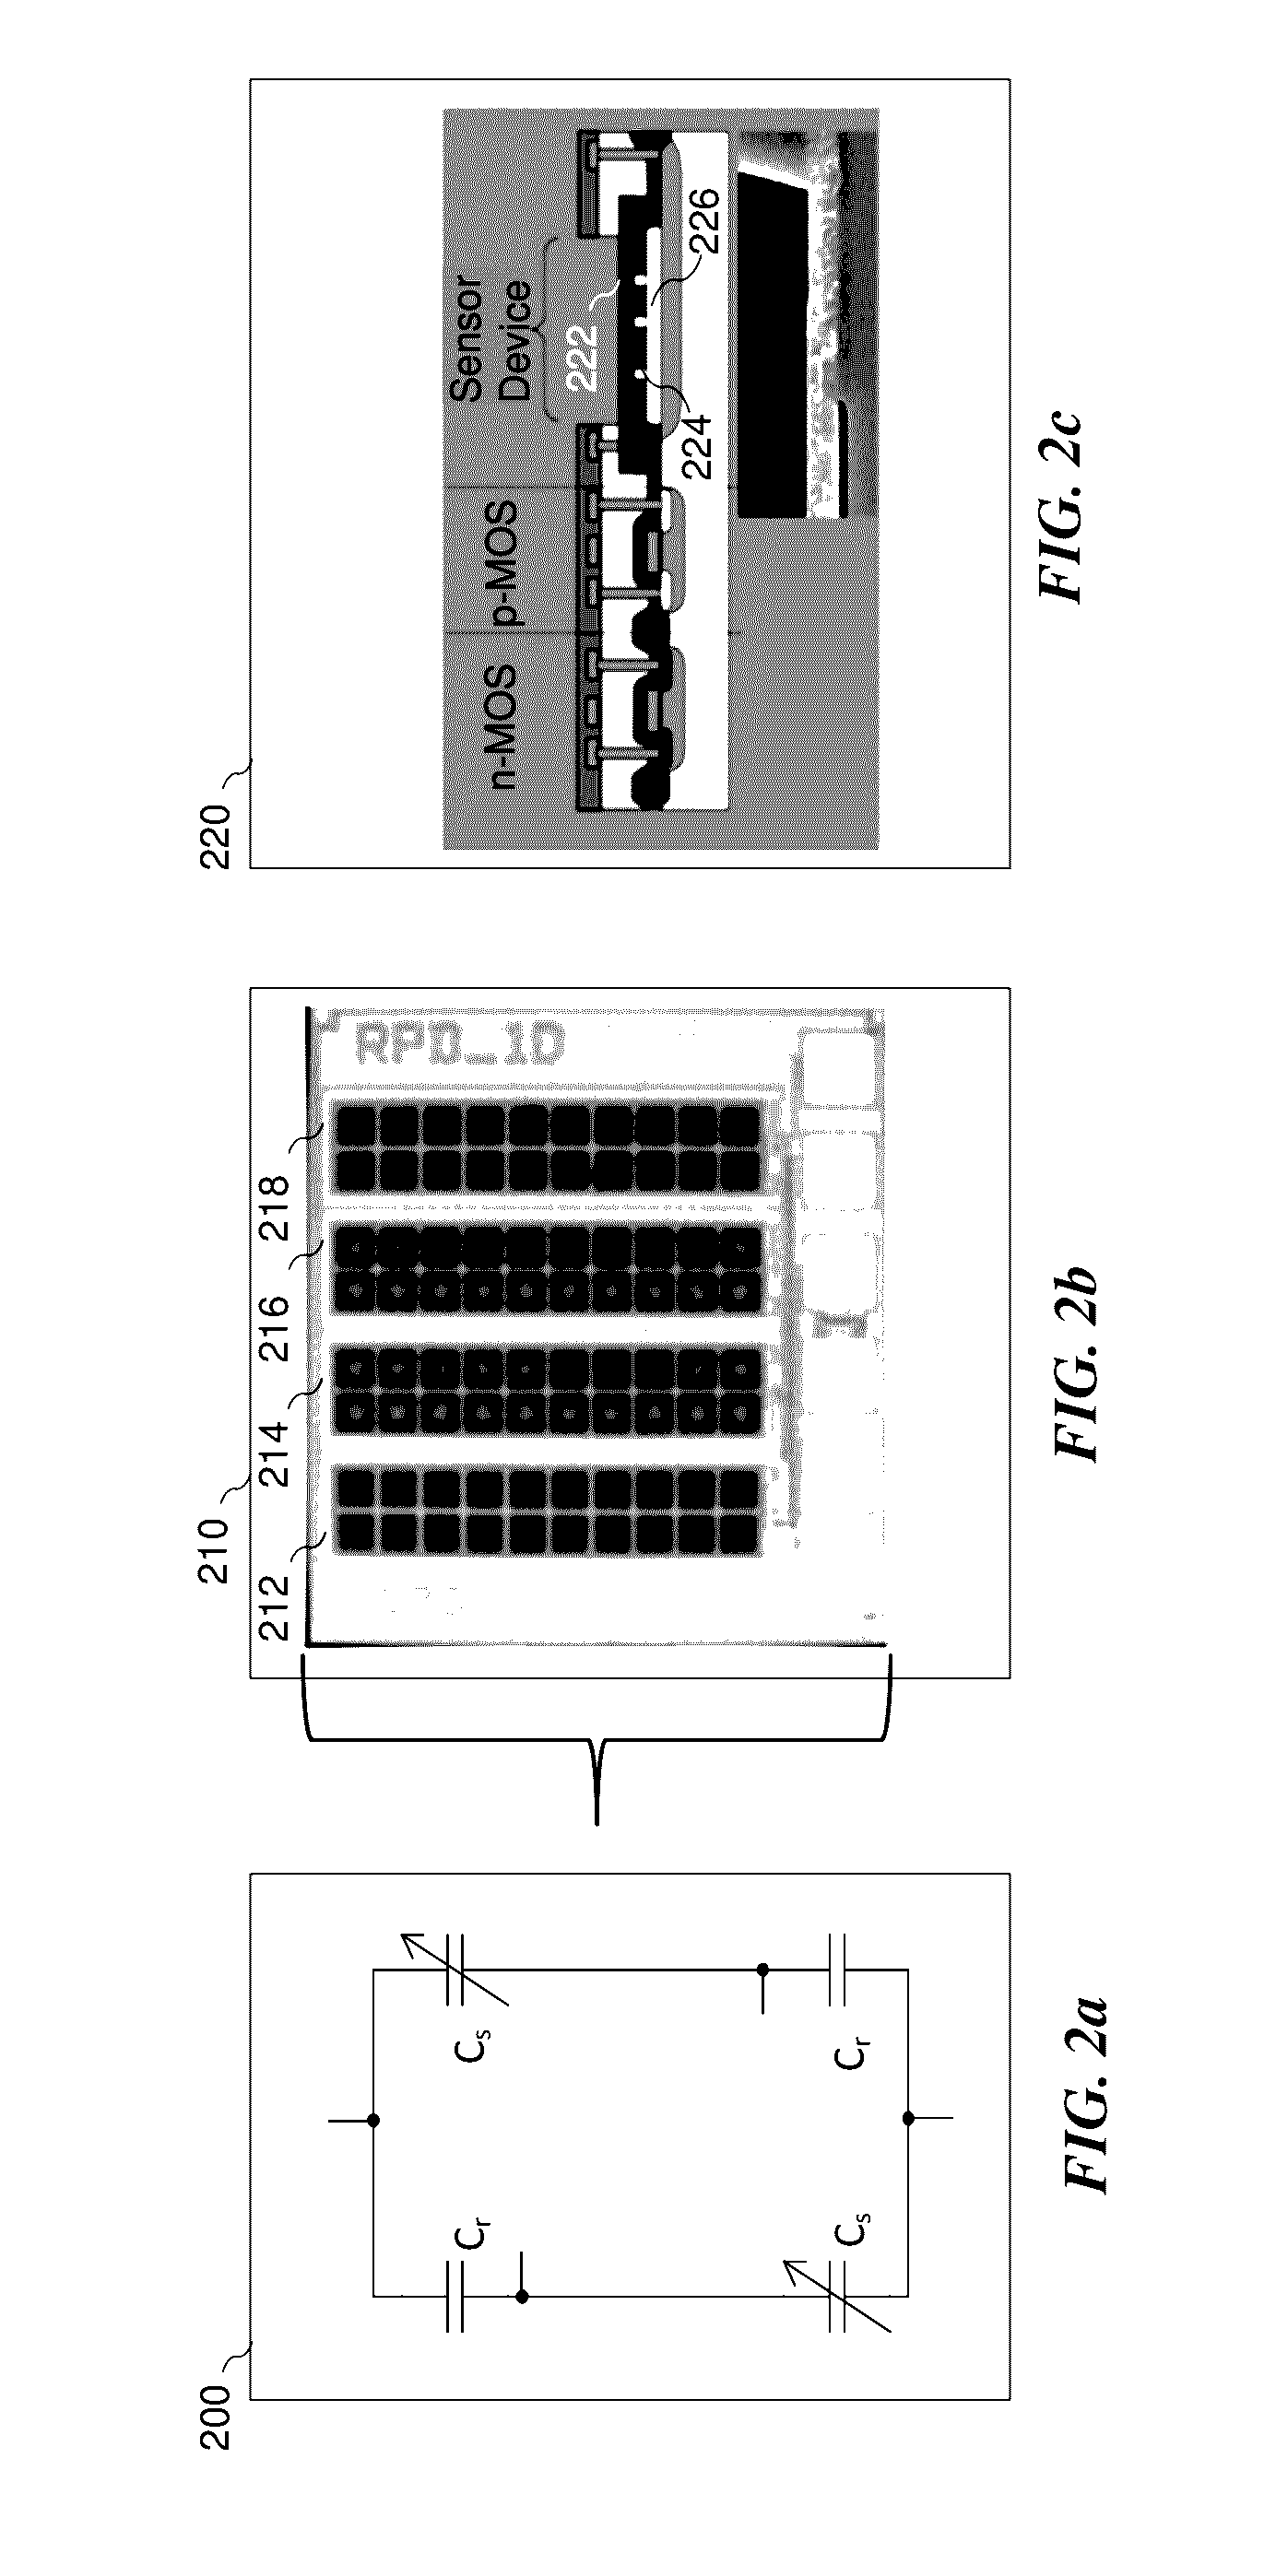 System and Method for a Capacitive Sensor